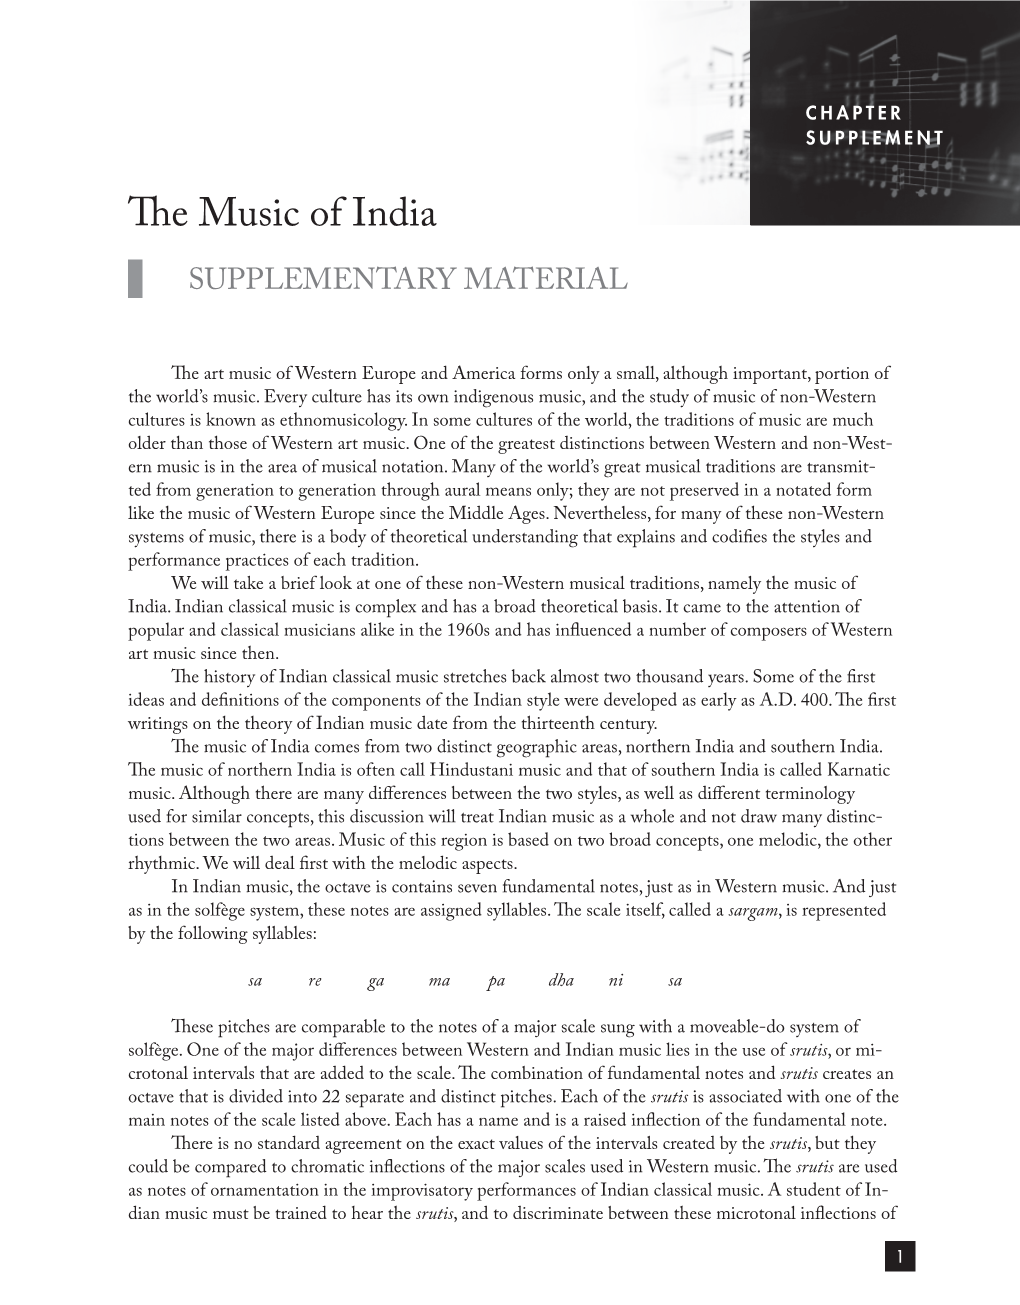 The Music of India SUPPLEMENTARY MATERIAL